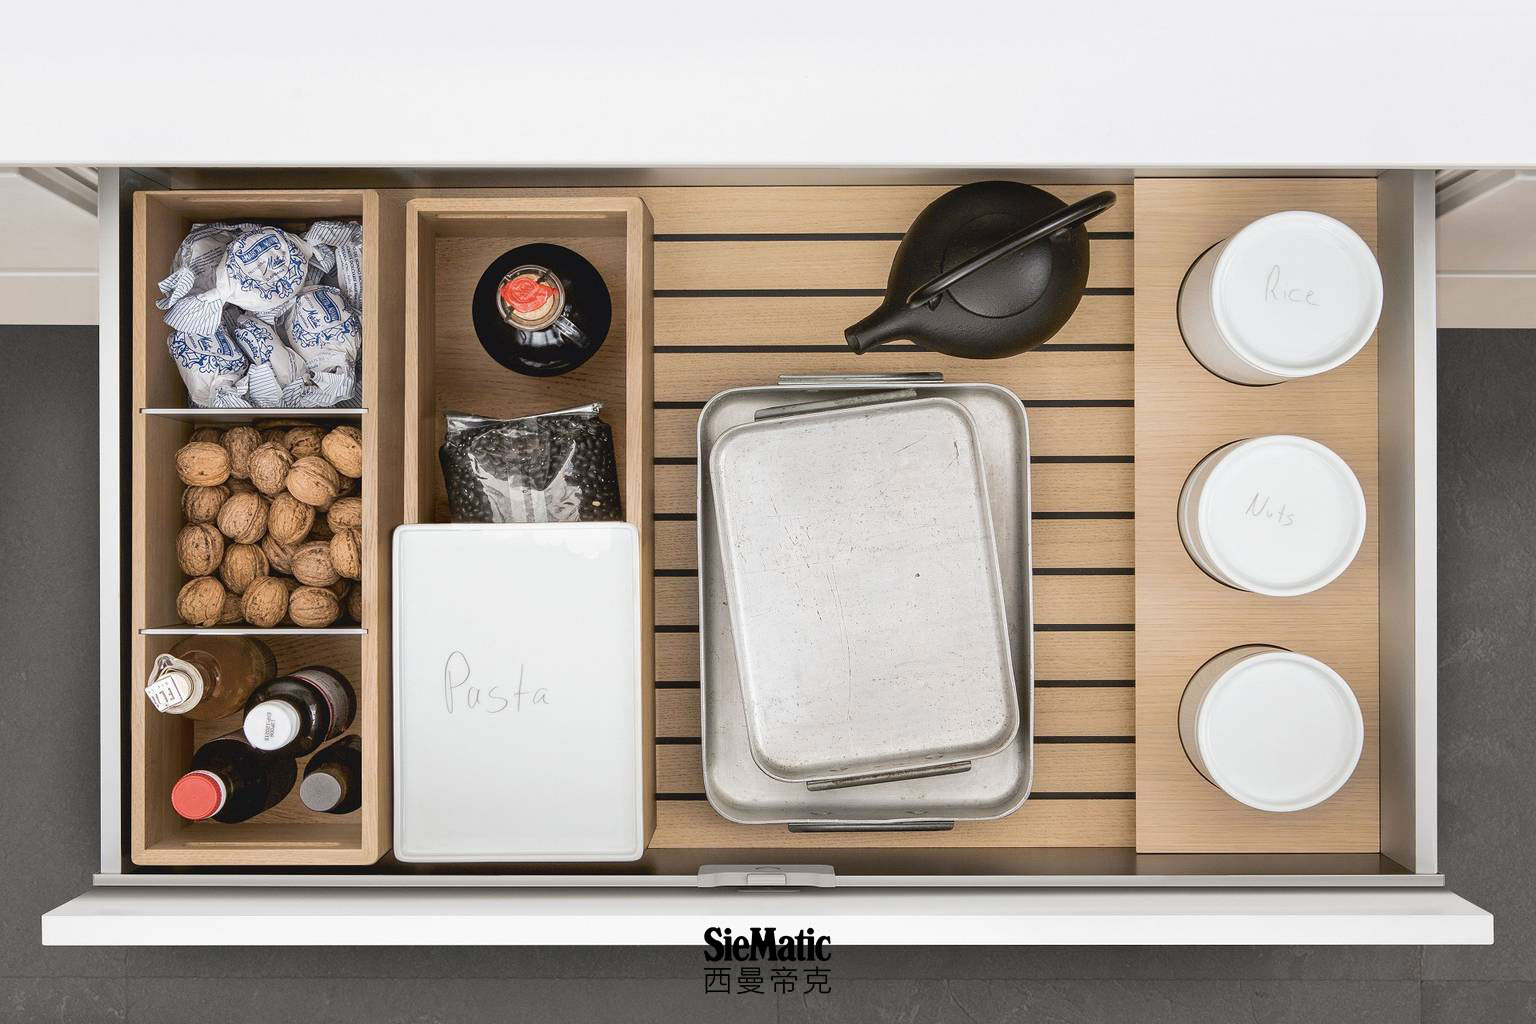 Porcelain containers, bottles and other supplies on SieMatic GripDeck with wooden kitchen accessories